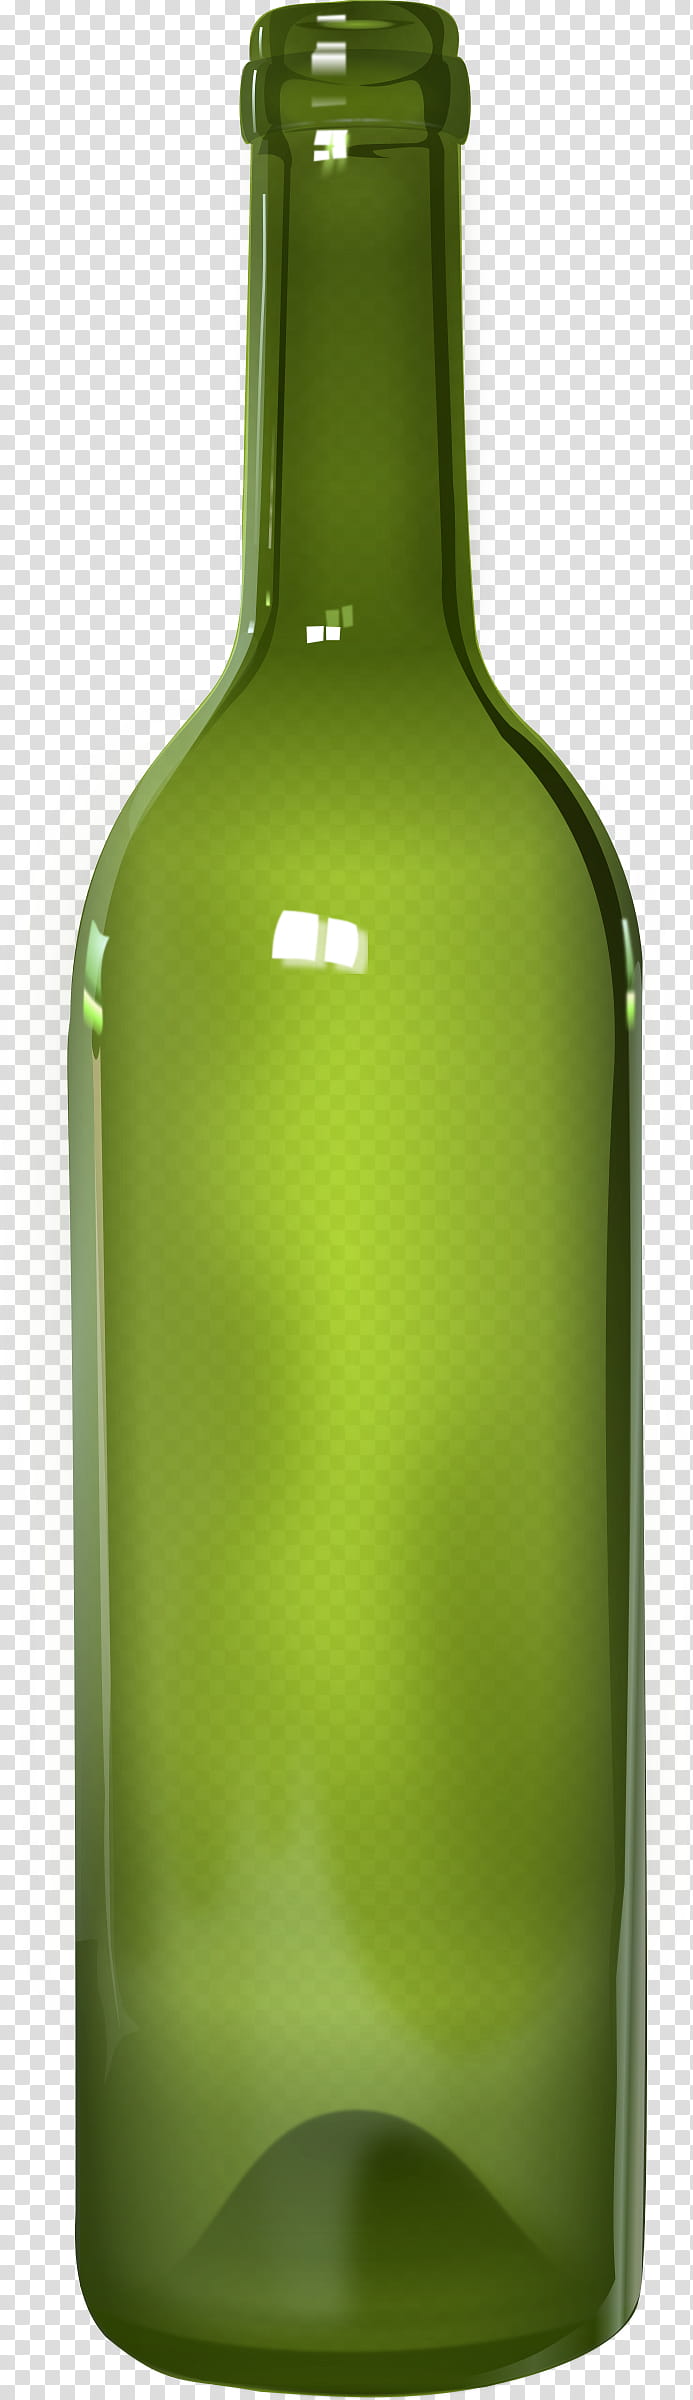 Champagne Bottle, Glass Bottle, Wine, Red Wine, Beer Bottle, Sparkling Wine, Wine Glass, Bordeaux Wine transparent background PNG clipart